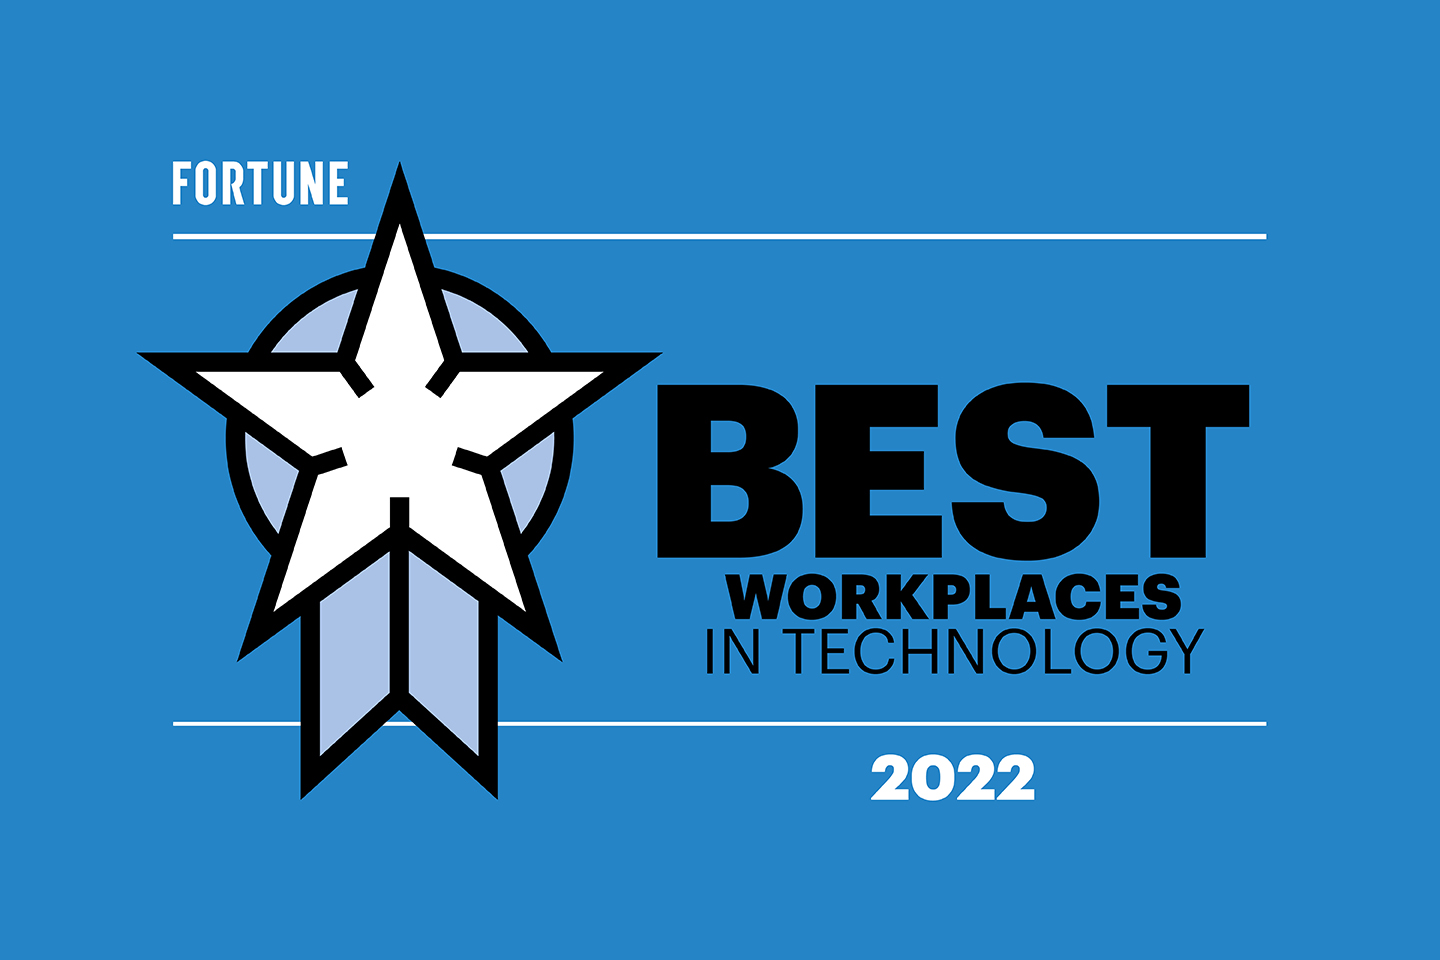 40 Best Large Workplaces in Technology